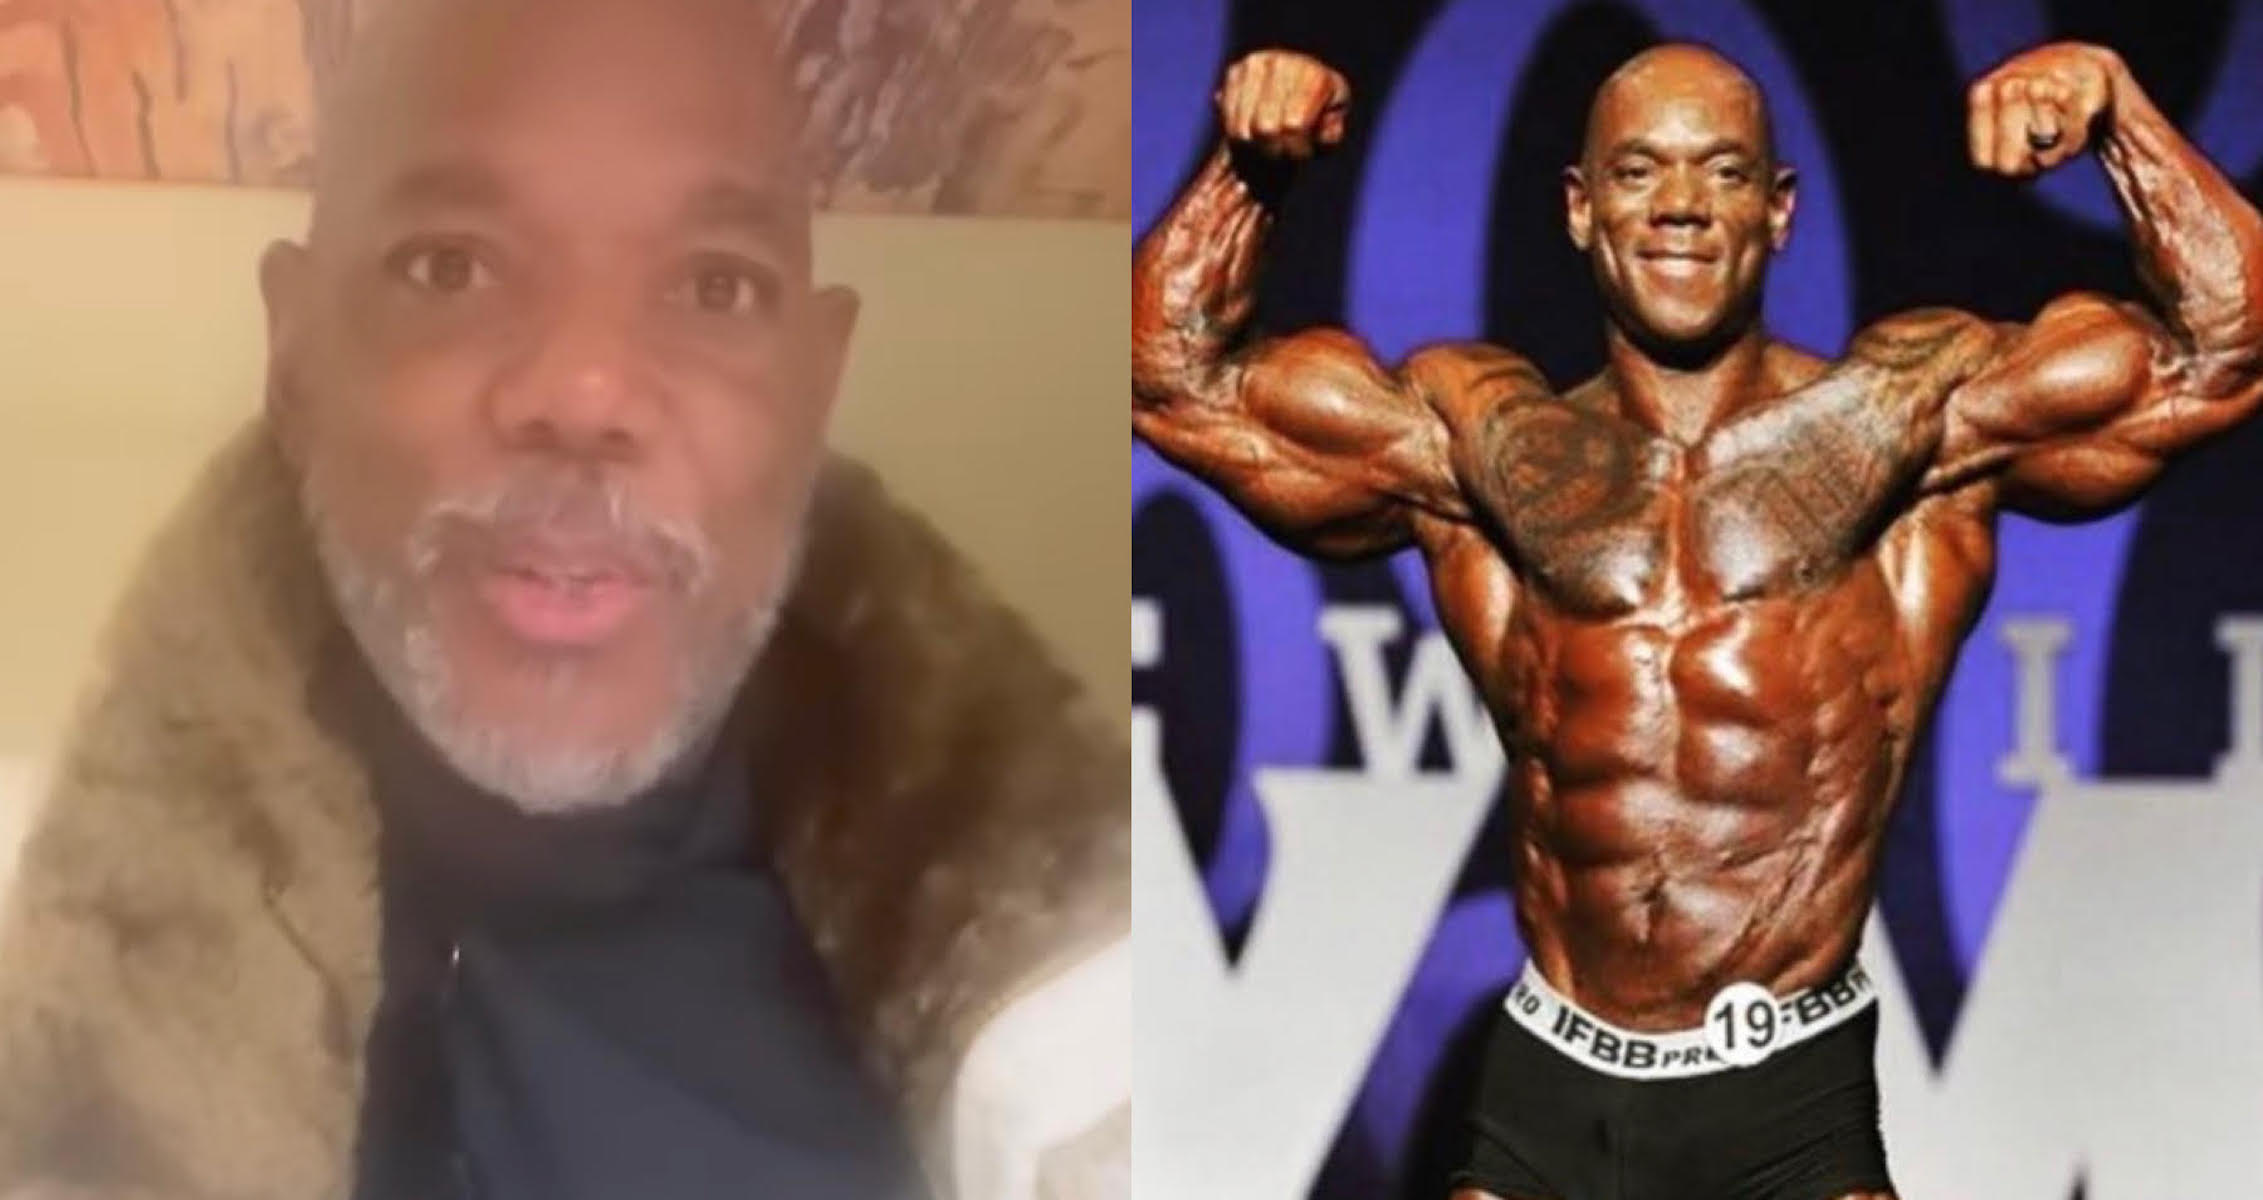 Flex Wheeler To Have Difficult Back Surgery: ‘They’re Not Even Sure I’ll Make It Through’